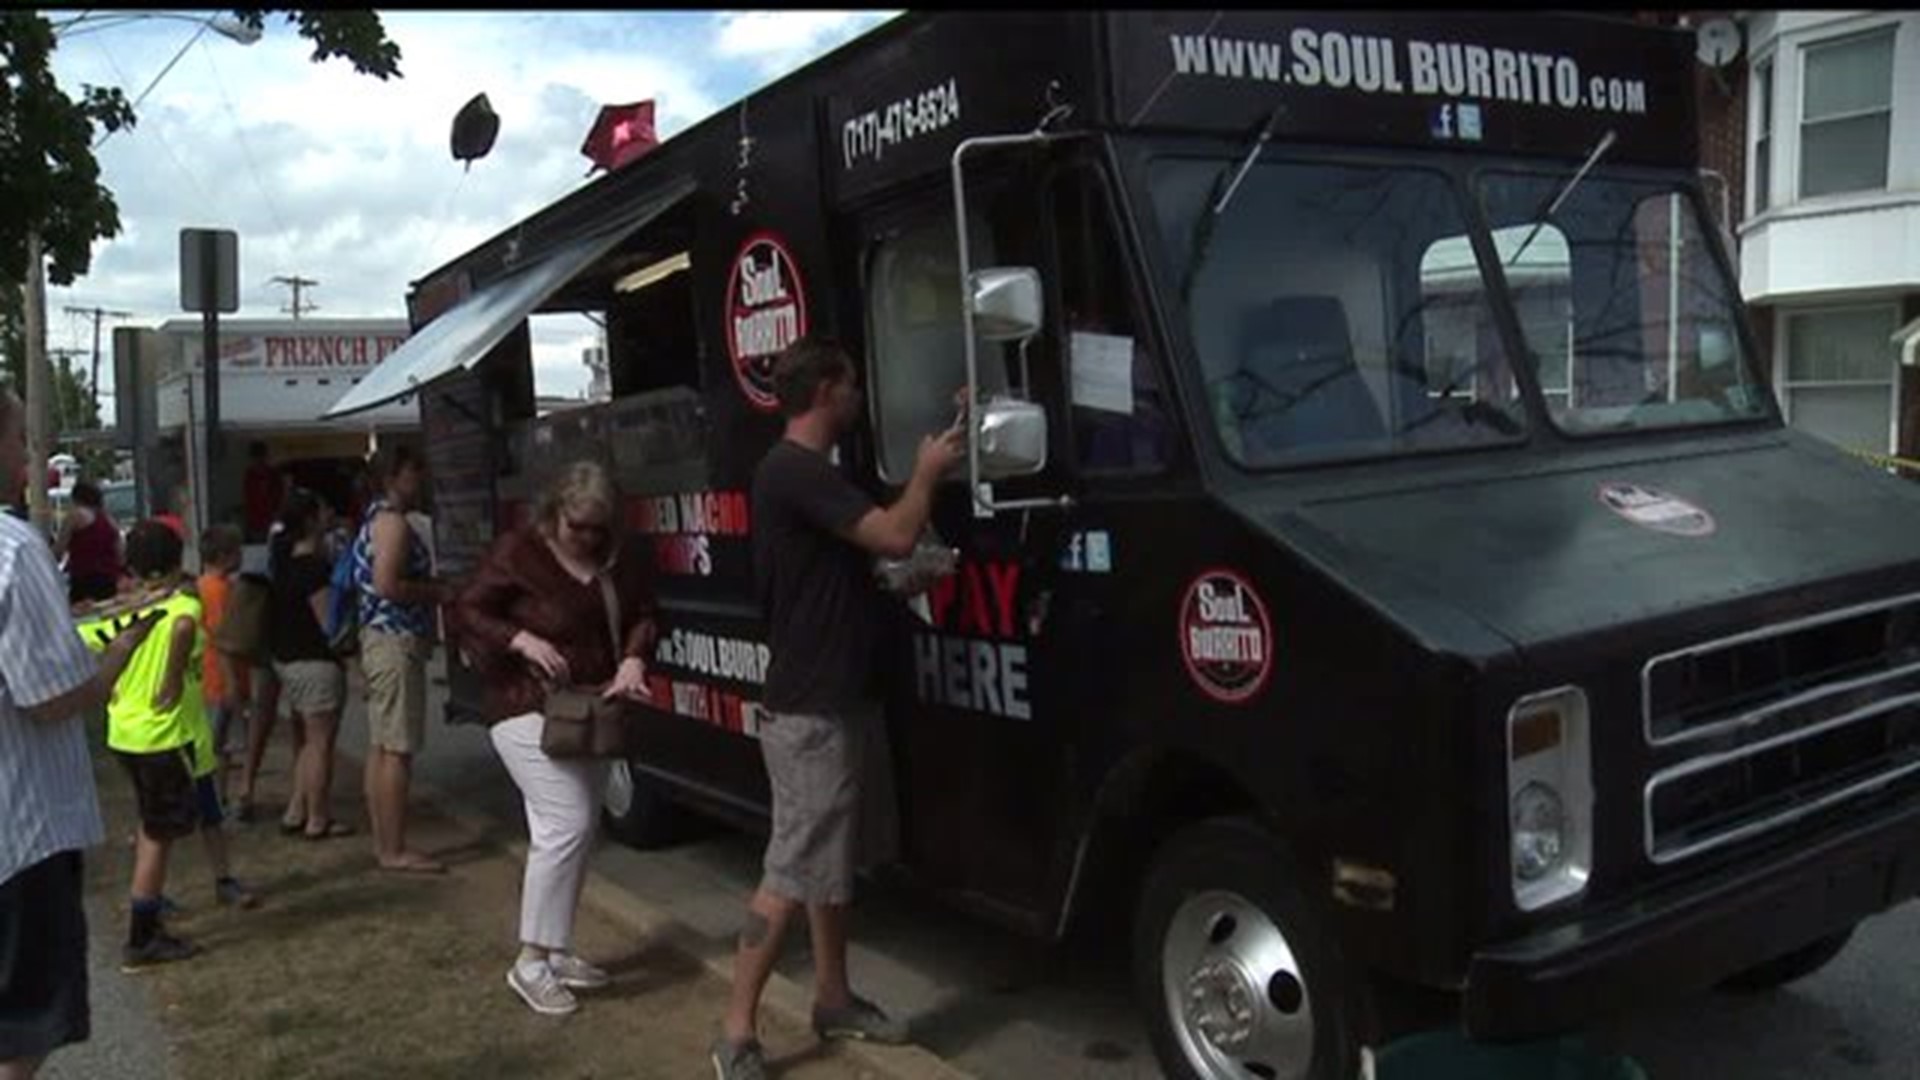 City council members to vote on food truck bill